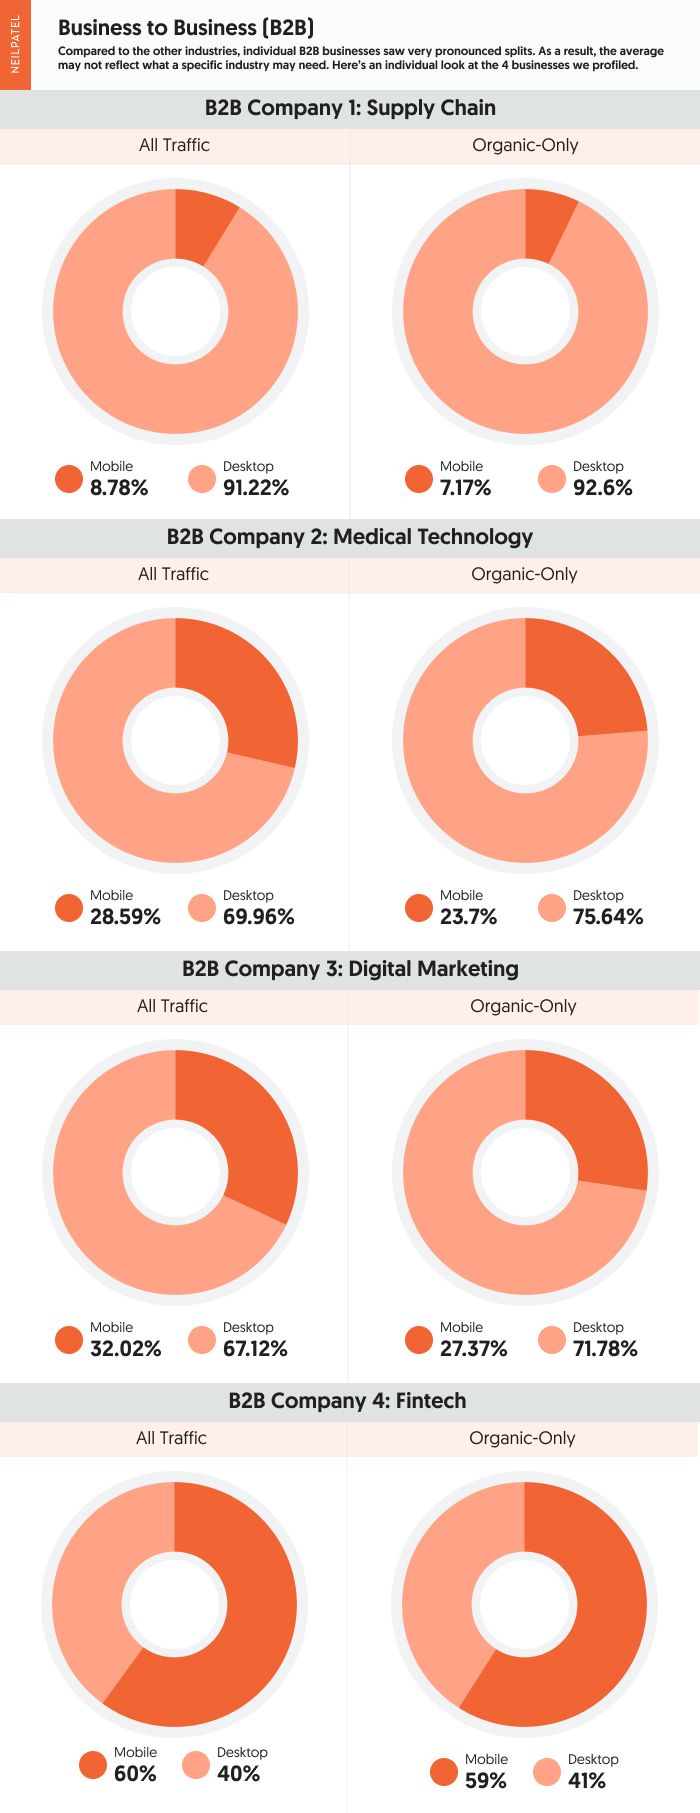 A comparison of mobile vs desktop usage on multiple B2B websites coming from ،ic-only traffic and all traffic sources